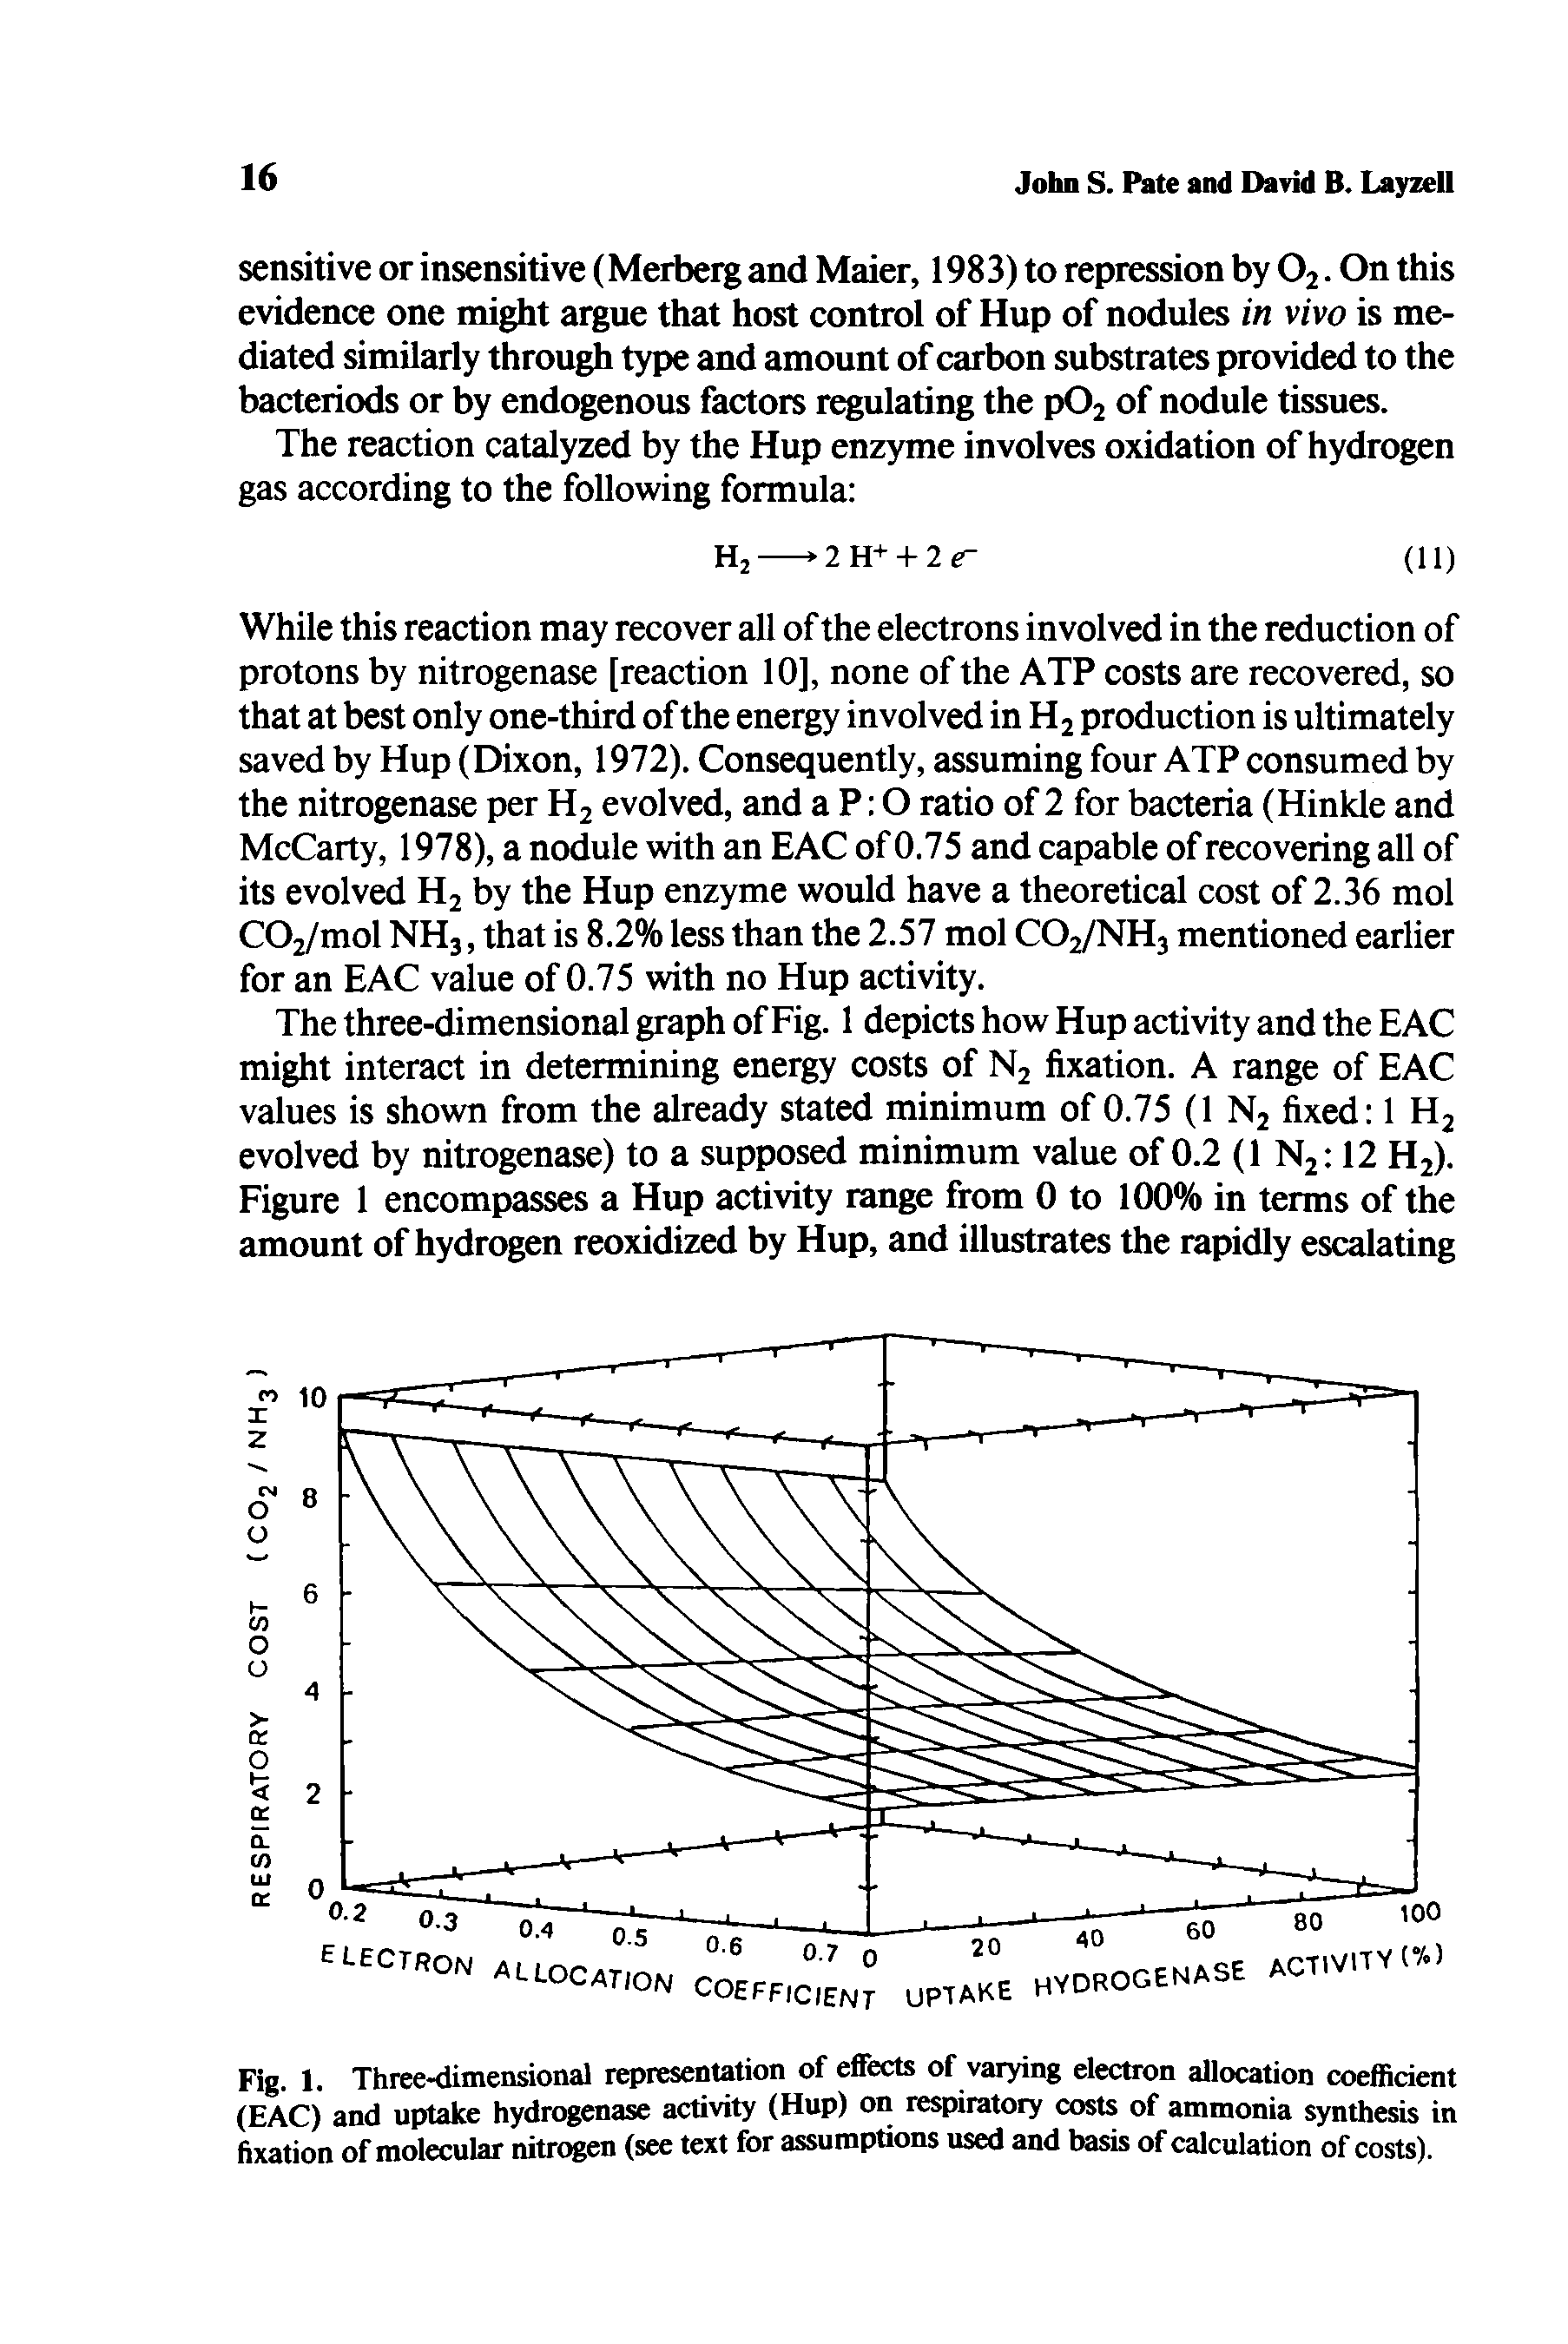 Fig. 1. Three-dimensional representation of effects of varying electron allocation coefficient (EAC) and uptake hydrogenase activity (Hup) on respiratory costs of ammonia synthesis fixation of molecular nitrogen (see text for assumptions used and basis of calculation of costs).